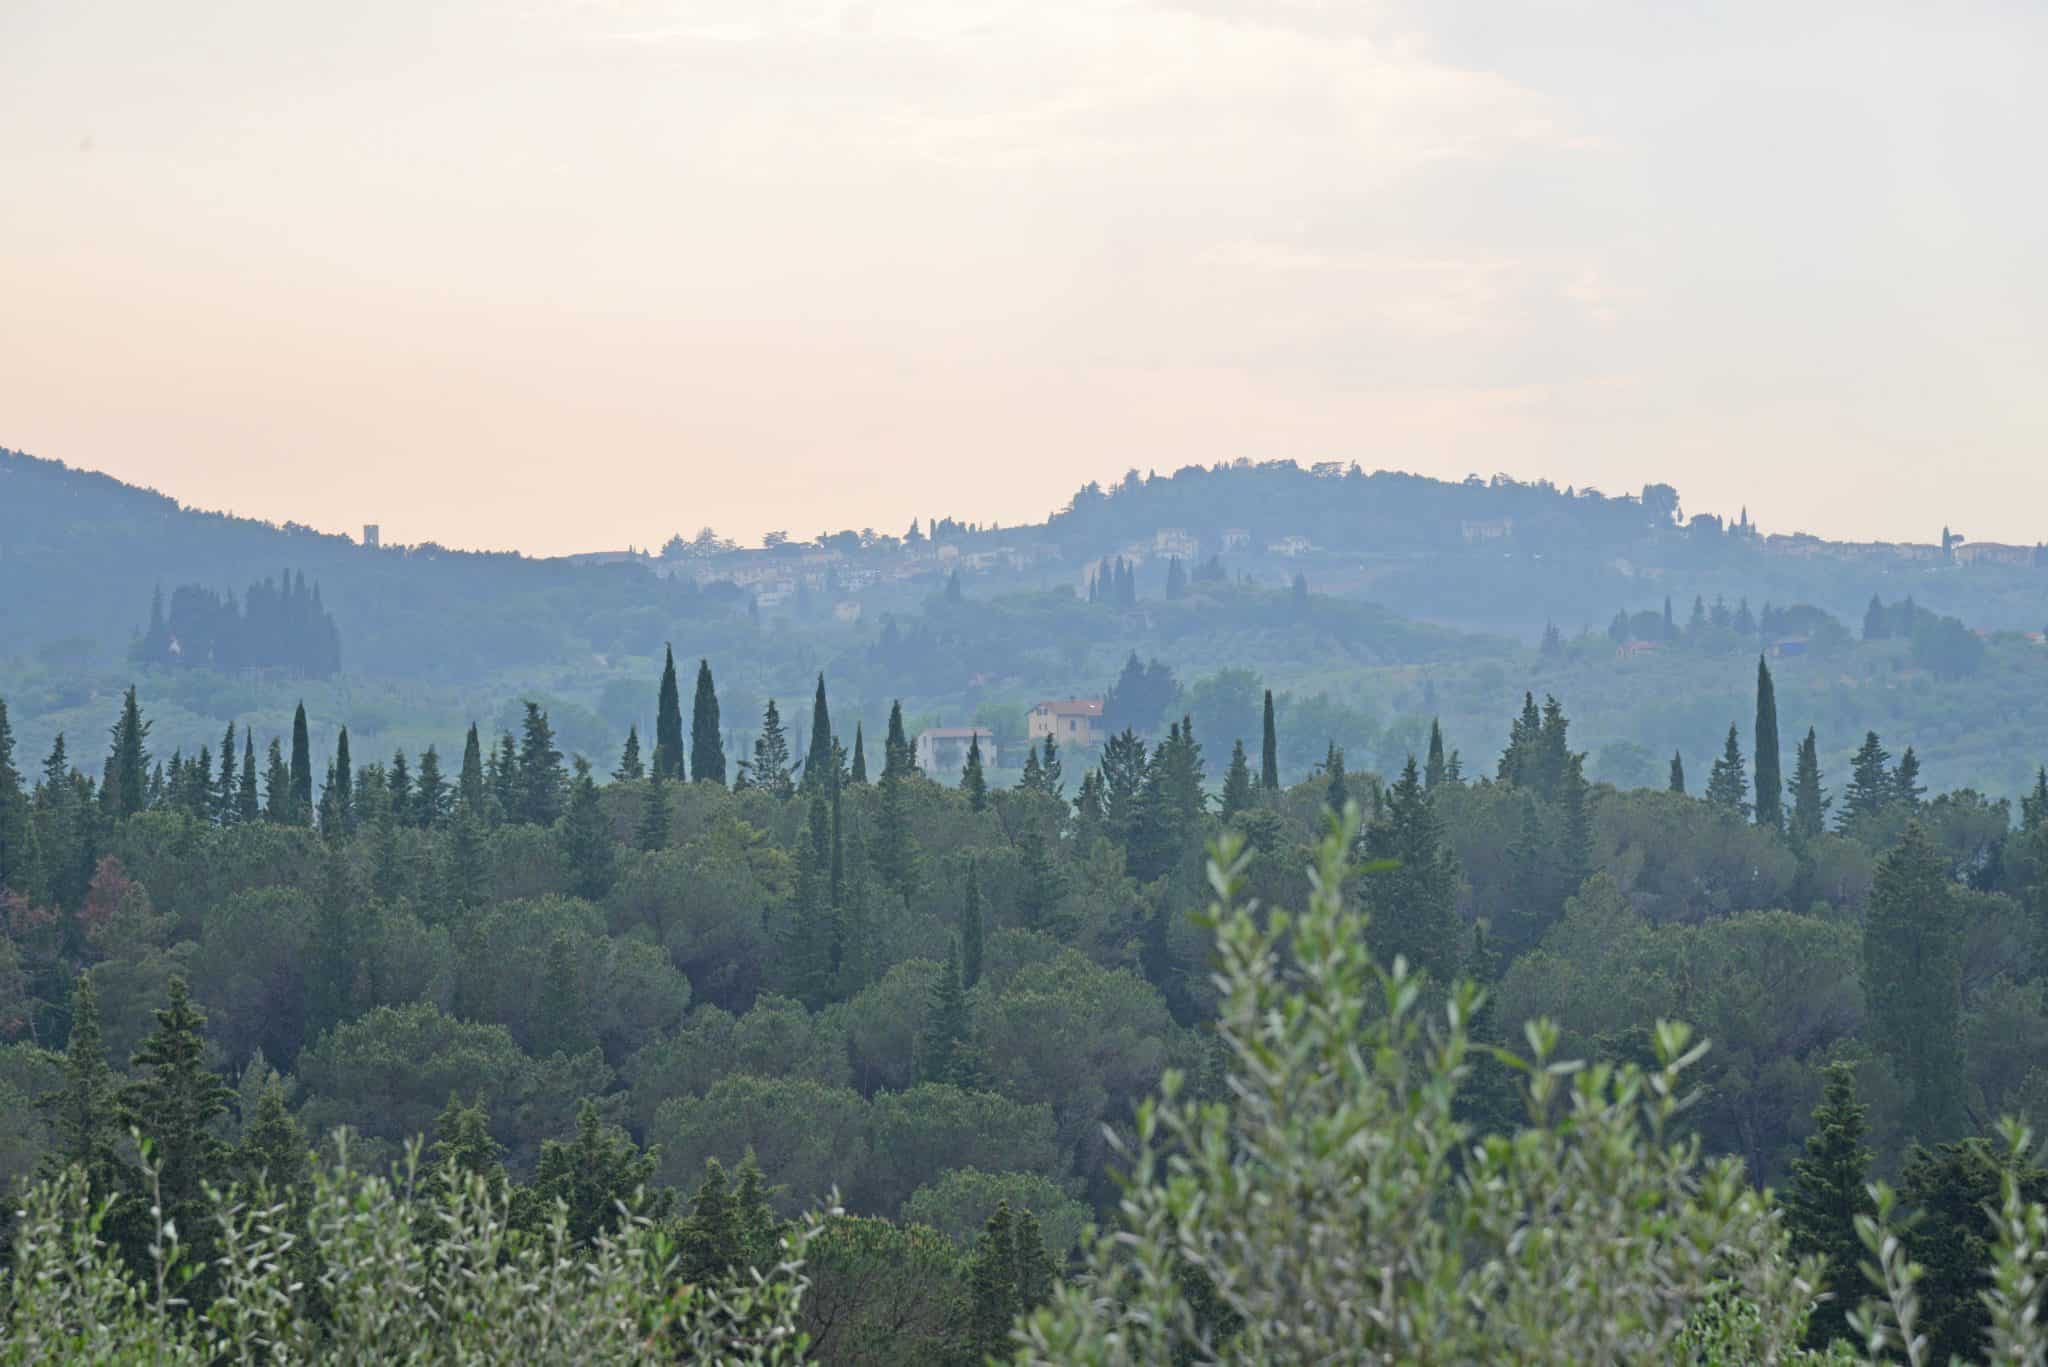 Planning your trip to Tuscany should include a visit to La Presura, a quaint location in Strada in Chianti. The perfect getaway from the bustle of Florence. #chianti #visittuscany www.savoryexperiments.com 